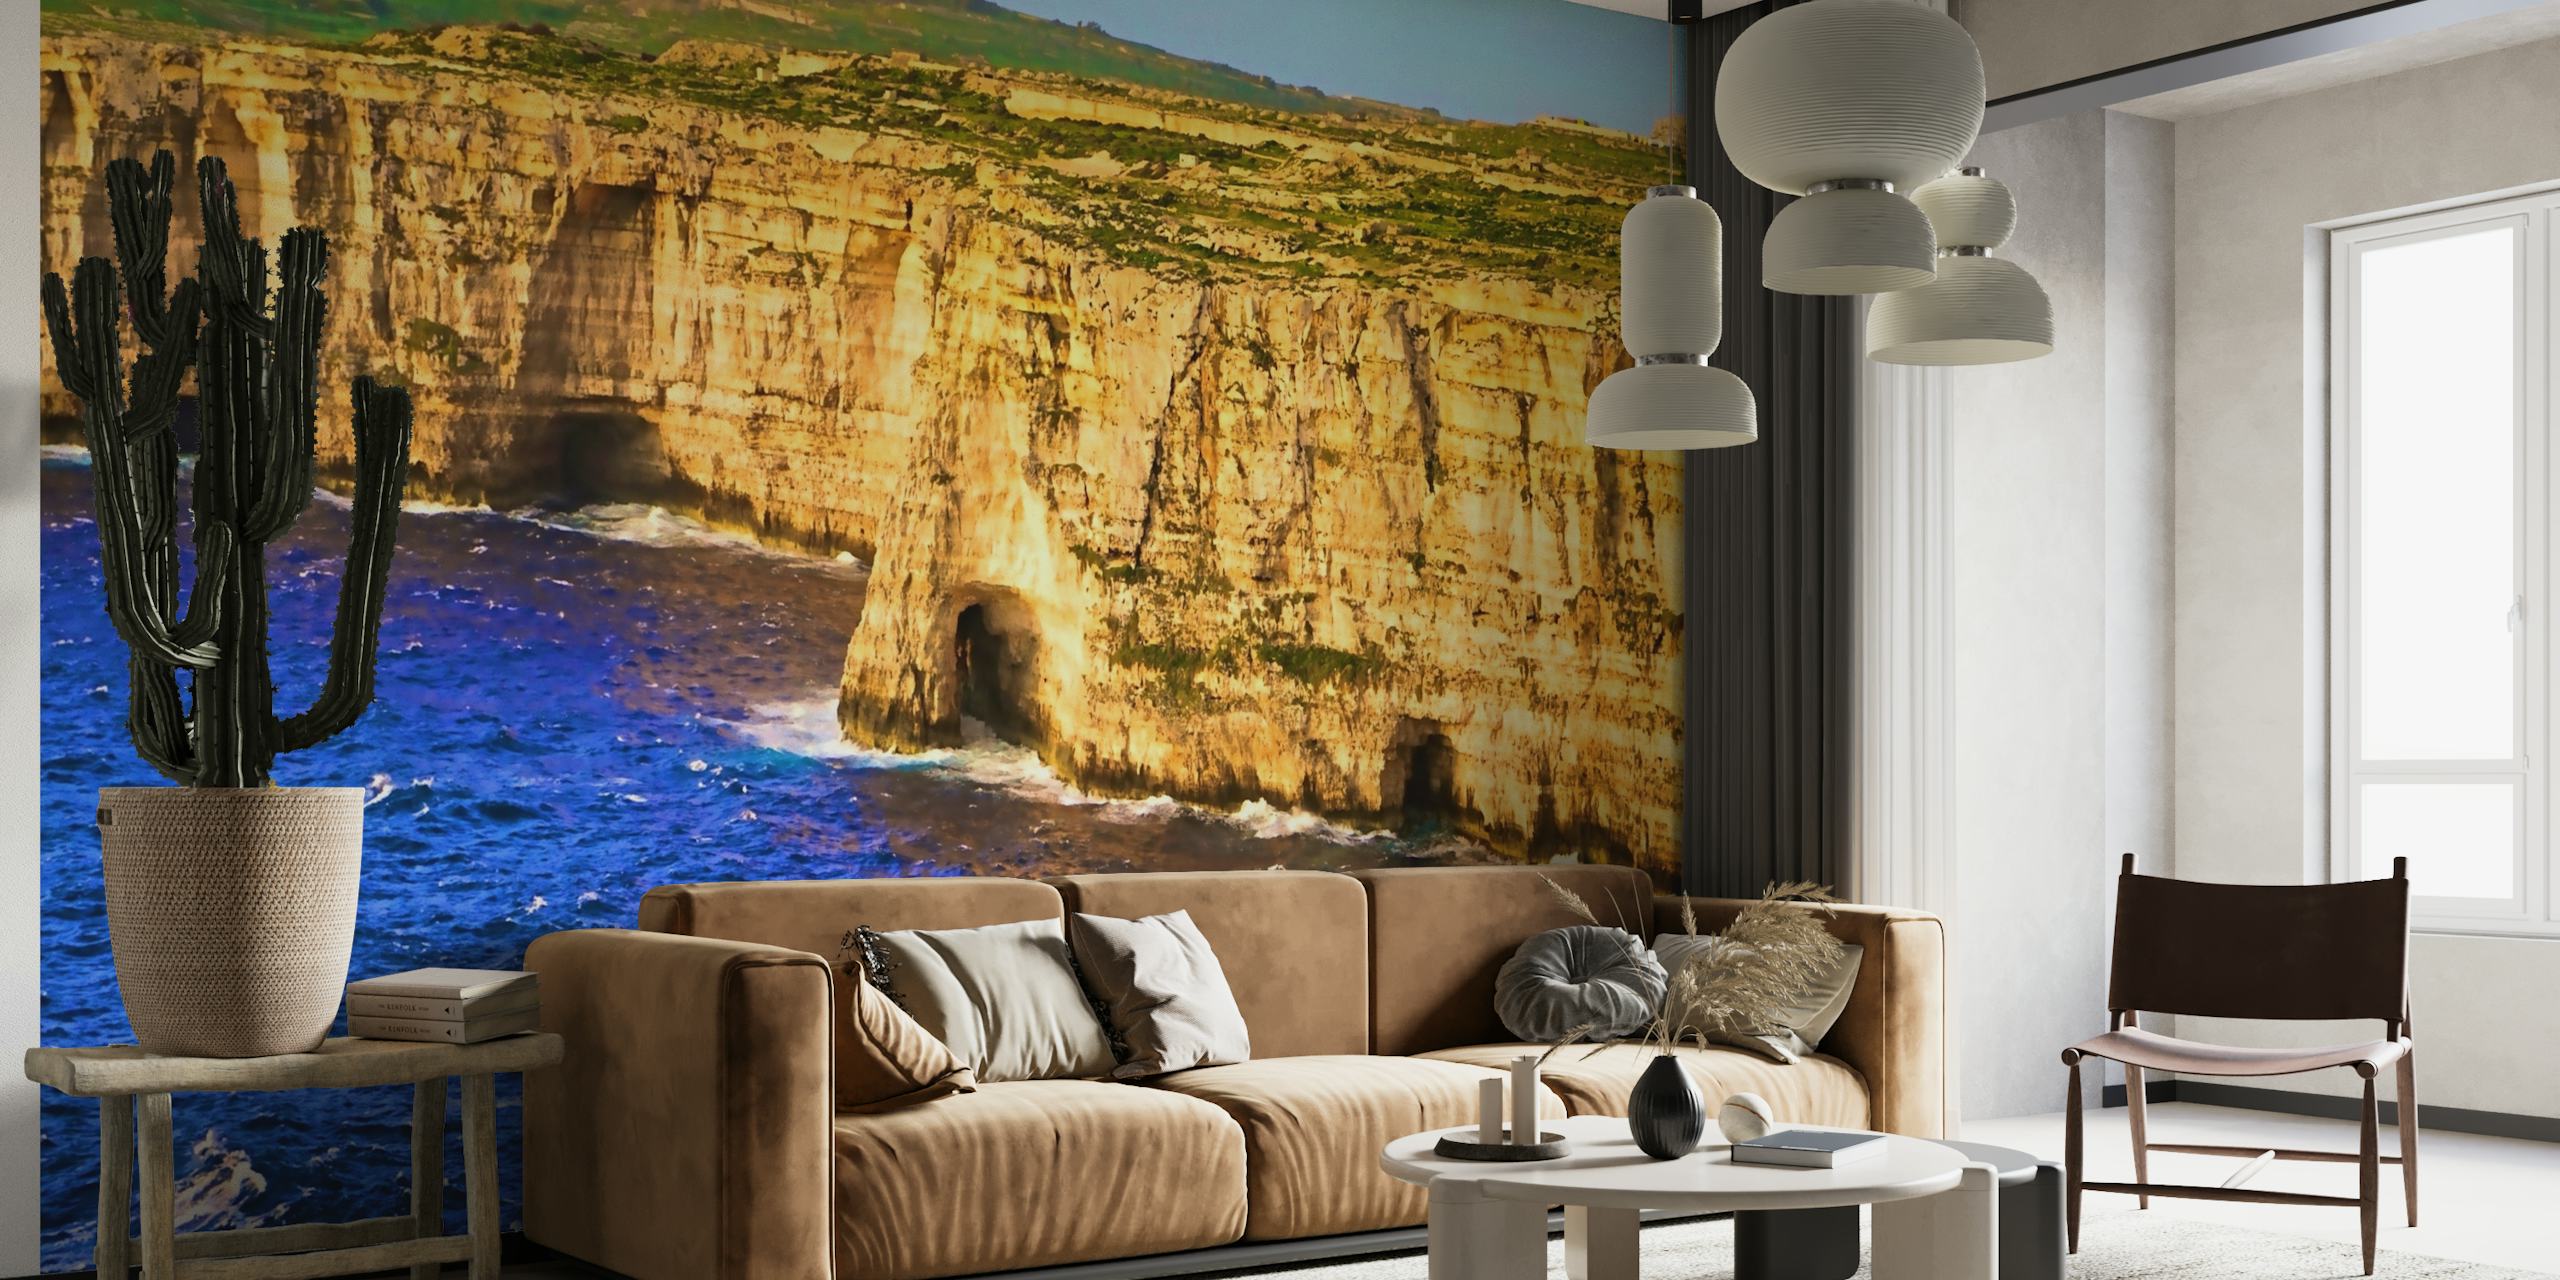 Soothing seascape wall mural with blue ocean waters and rugged cliffs